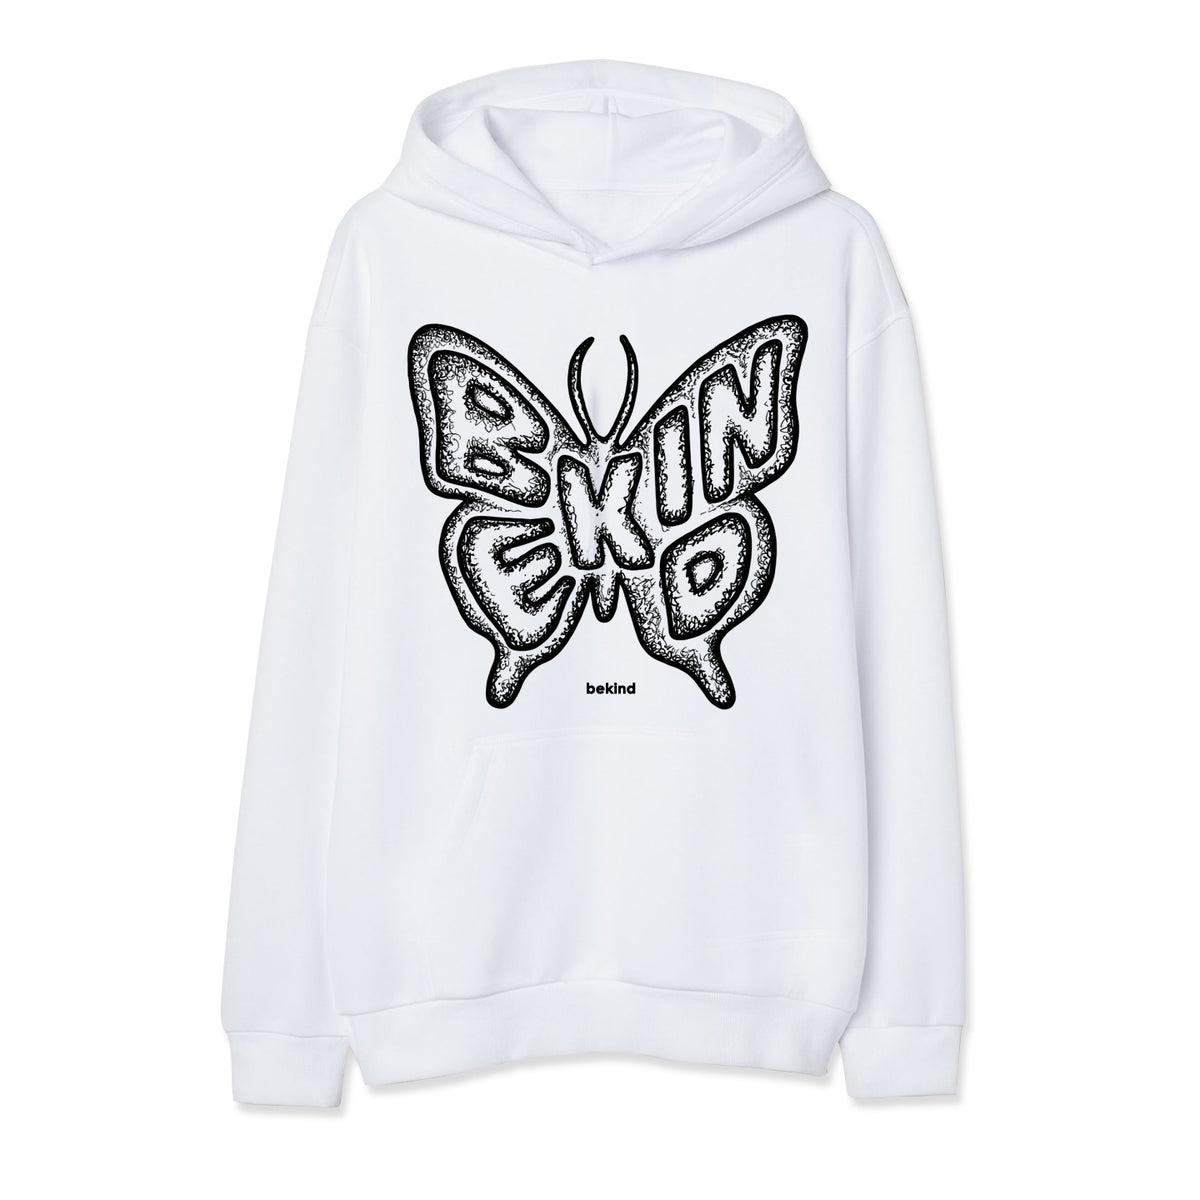 Bekind Butterfly Hoodies (Limited Edition) TDL – The Dirt Label